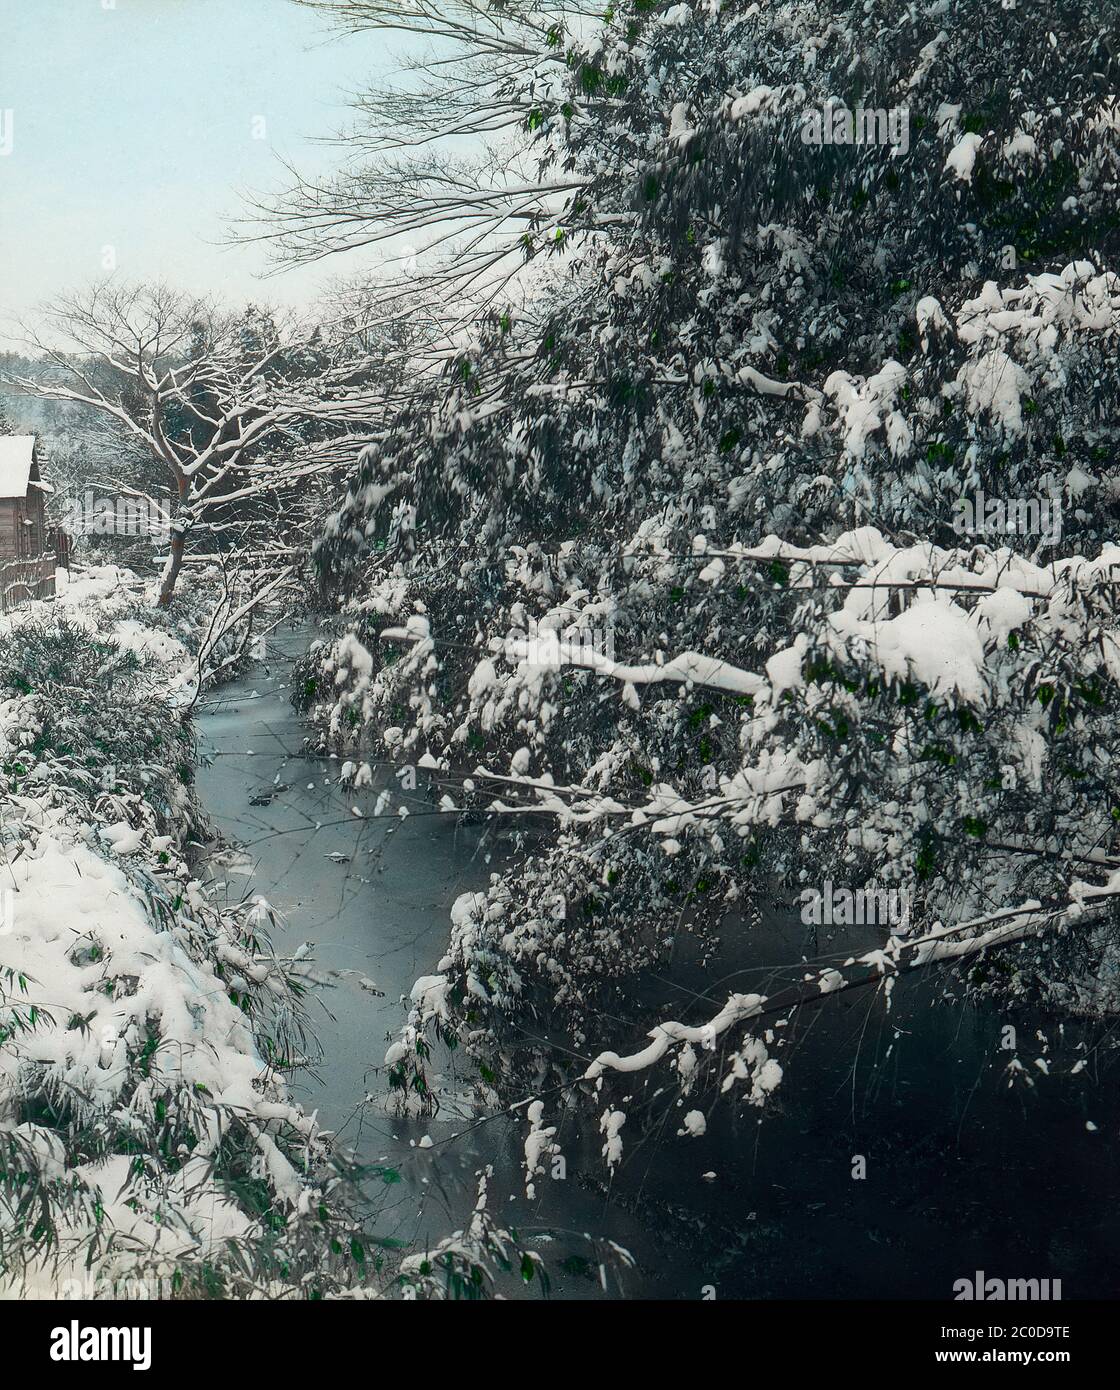 [ 1900s Japan - Snow Covered Trees ] — Snow covered trees in early 20th century Japan.  20th century vintage glass slide. Stock Photo